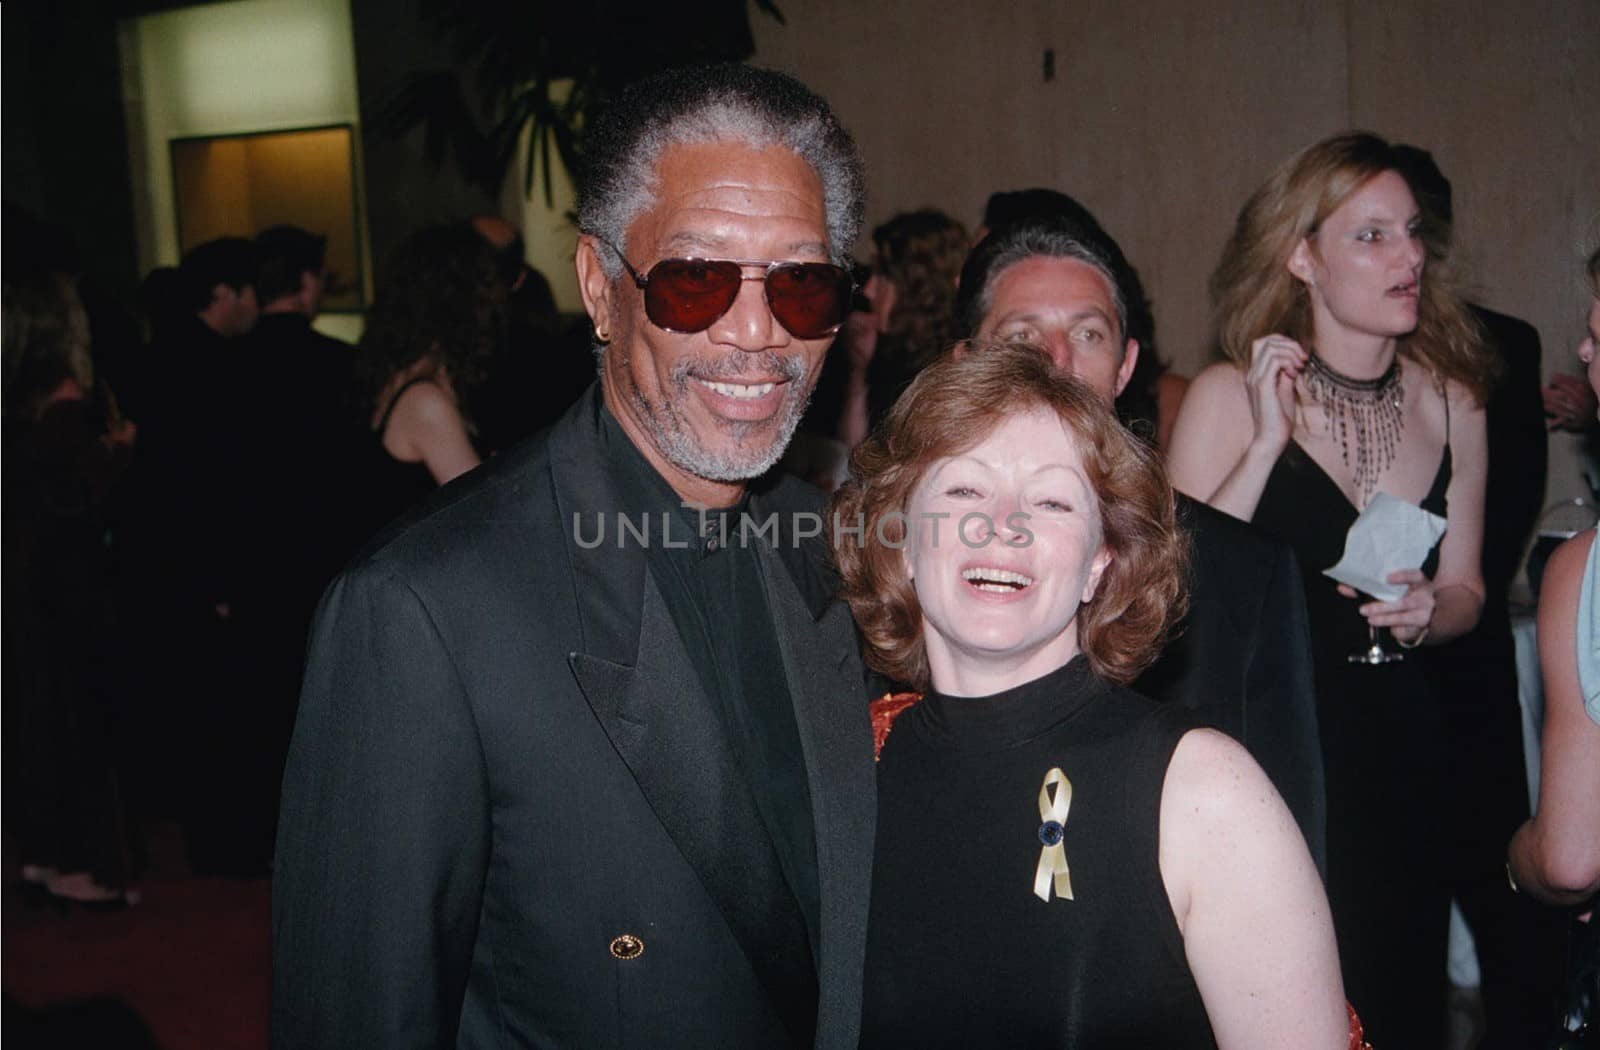 Morgan Freeman and Frances Fisher at the Hollywood Film Awards in Beverly Hills. 08-08-00